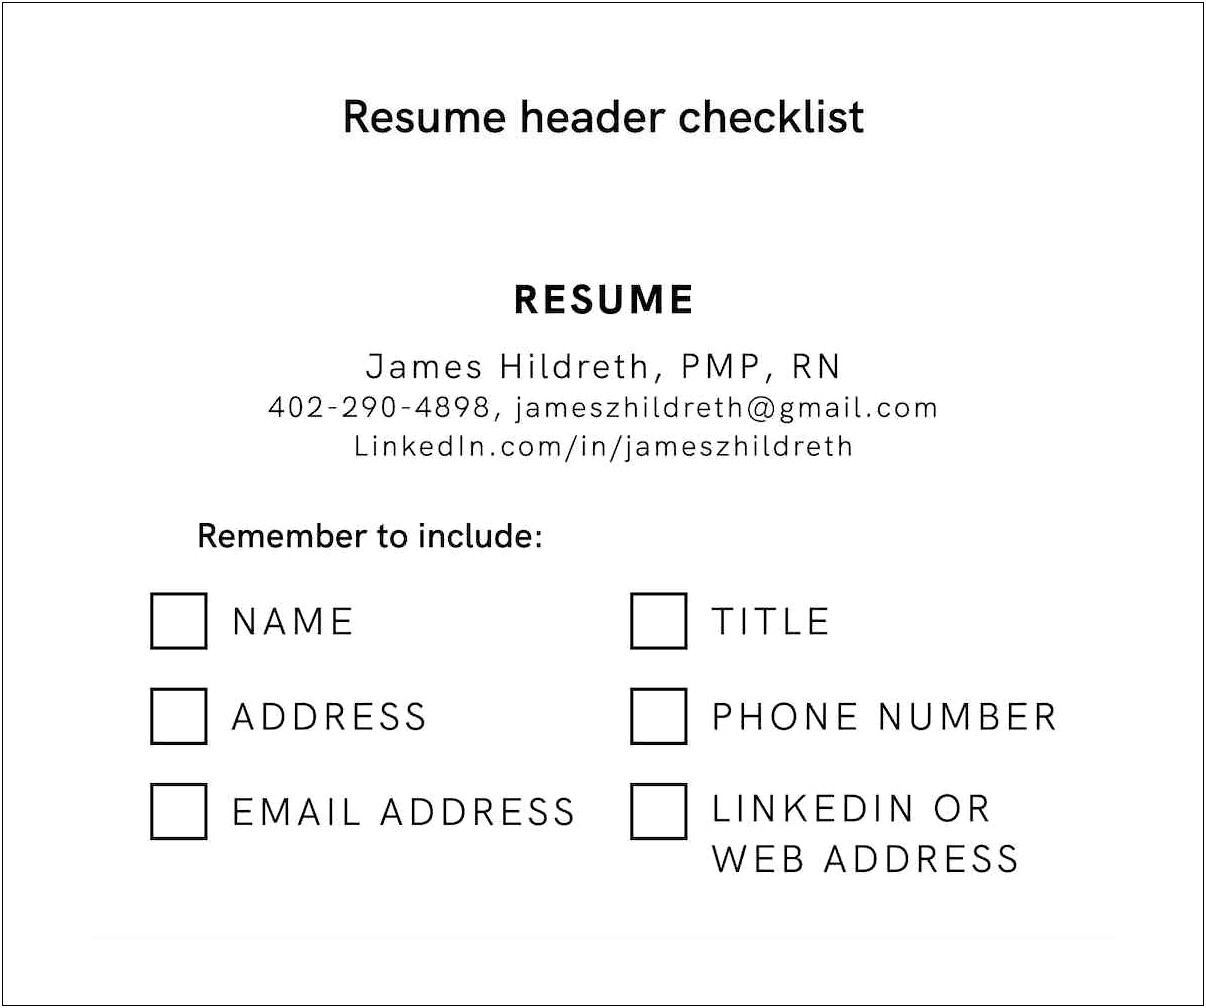 Putting Names In Body Of Resume